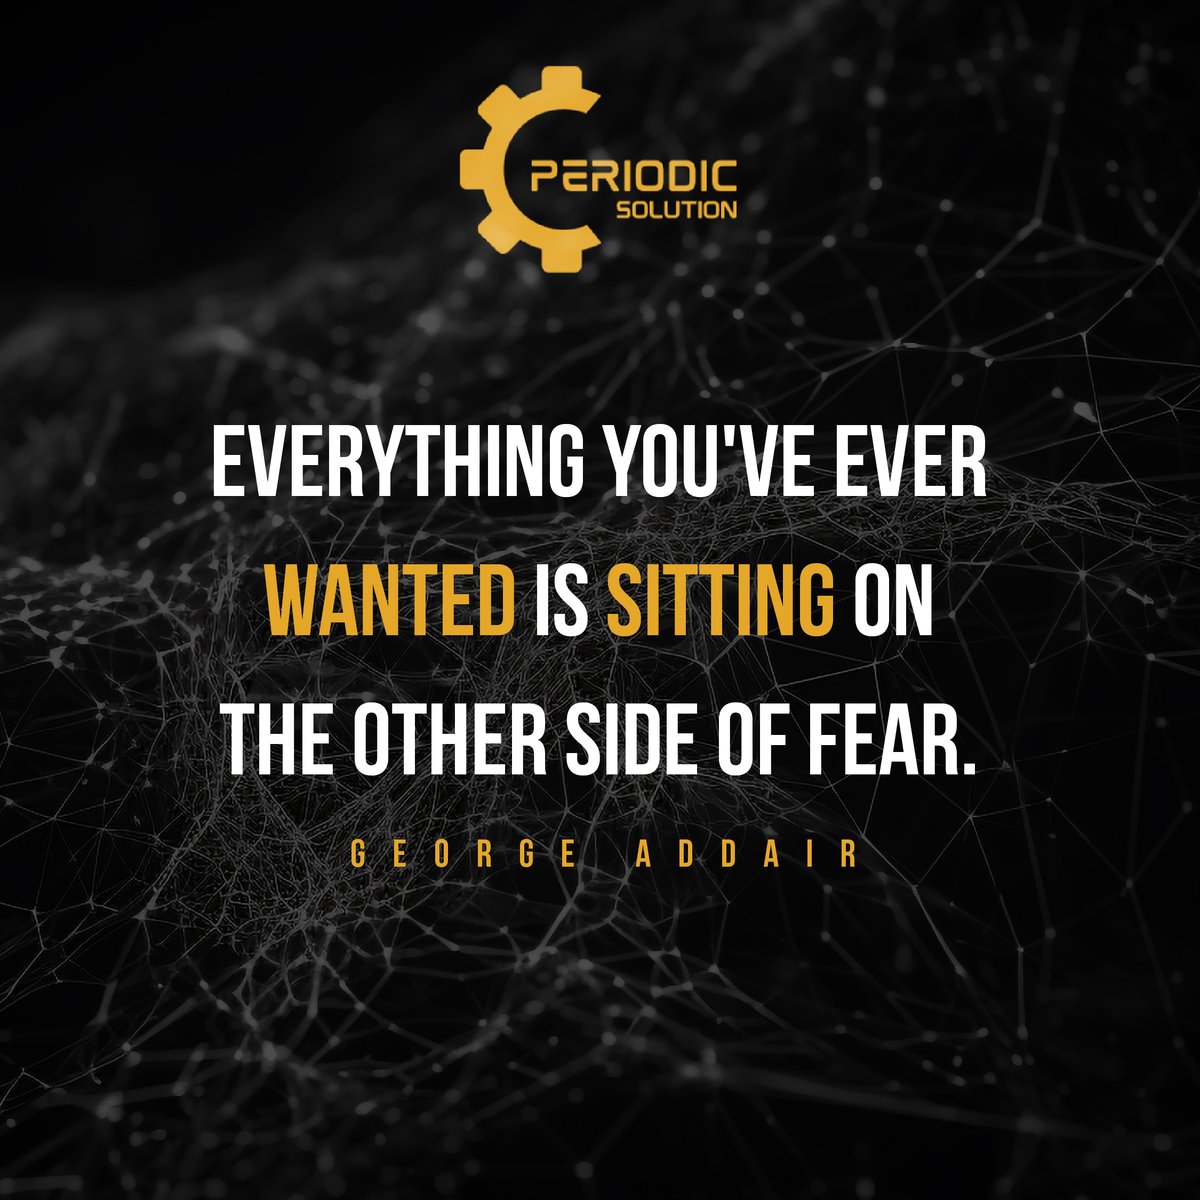 Qoute of the day
.
.
.
#faceyourfears #overcomeobstacles #fearlessjourney #beyondfear #courageousheart #chaseyourdreams #conqueryourfears #dreamsoverfear #fearlessmindset
#bravedecisions #embracechallenge #nofearnolimits #boldsteps #fearnotdreams #beyondcomfort #couragetodream